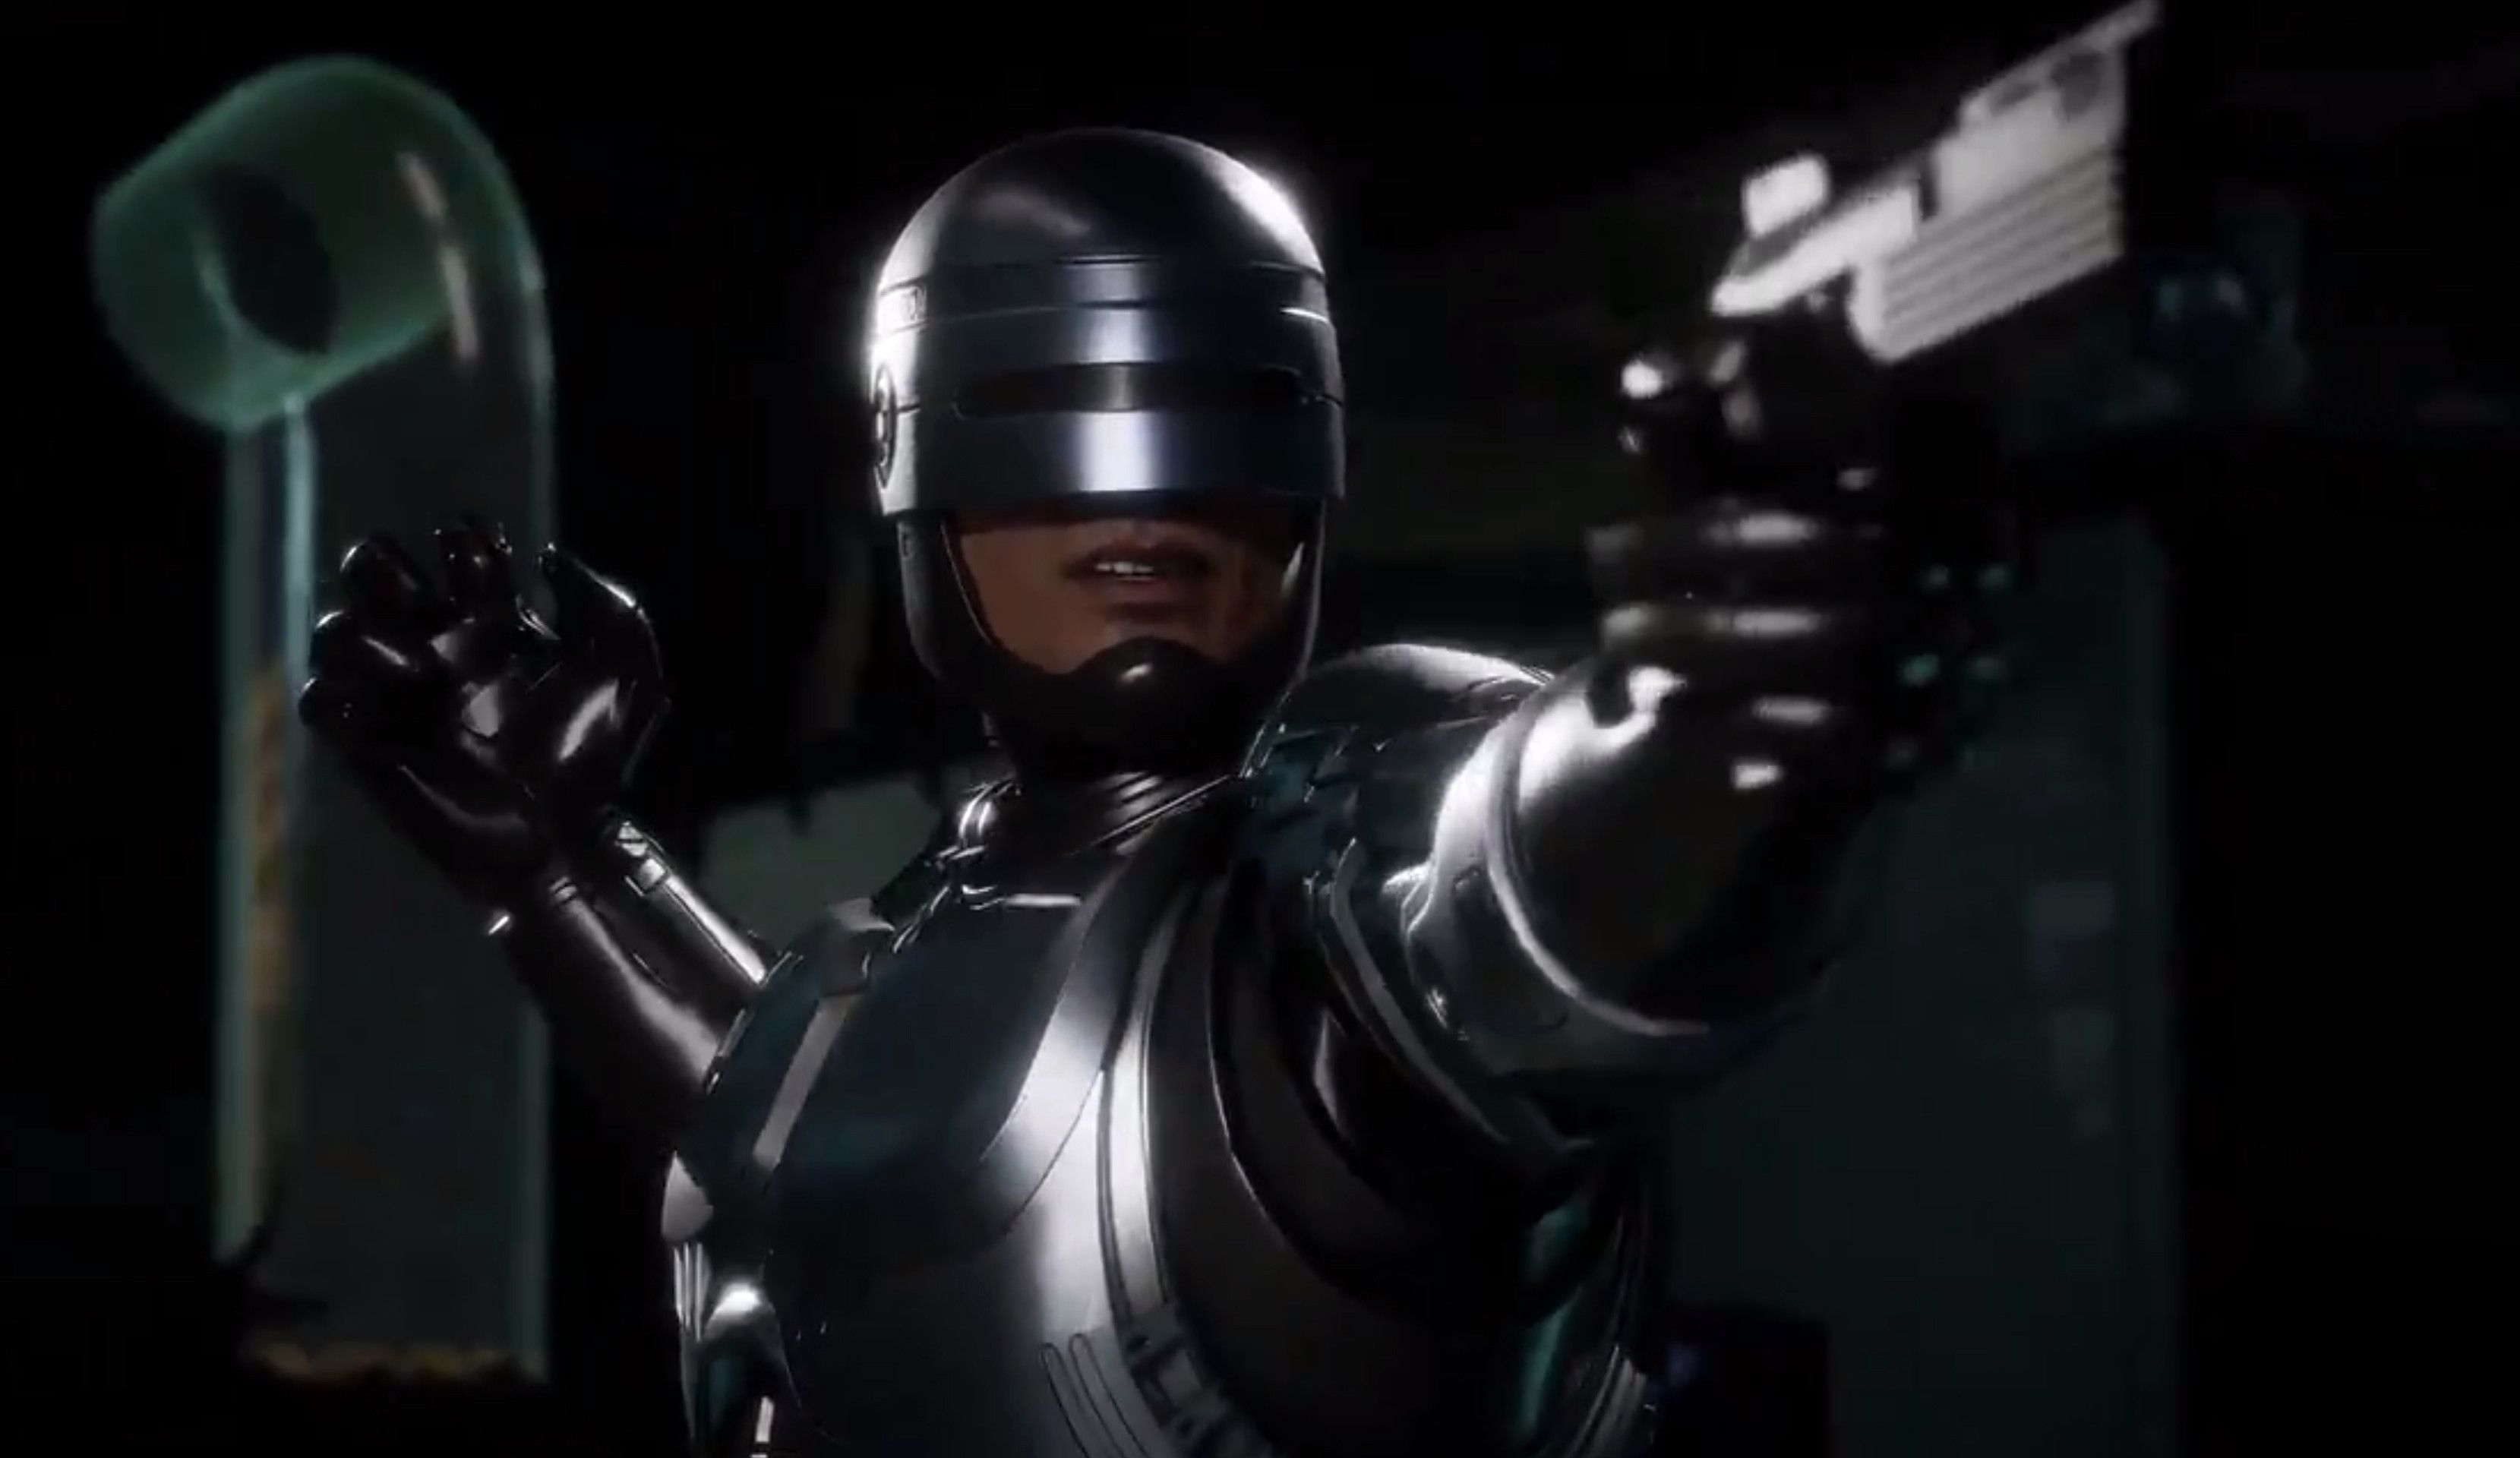 RoboCop is coming to Mortal Kombat 11 via the Aftermath expansion